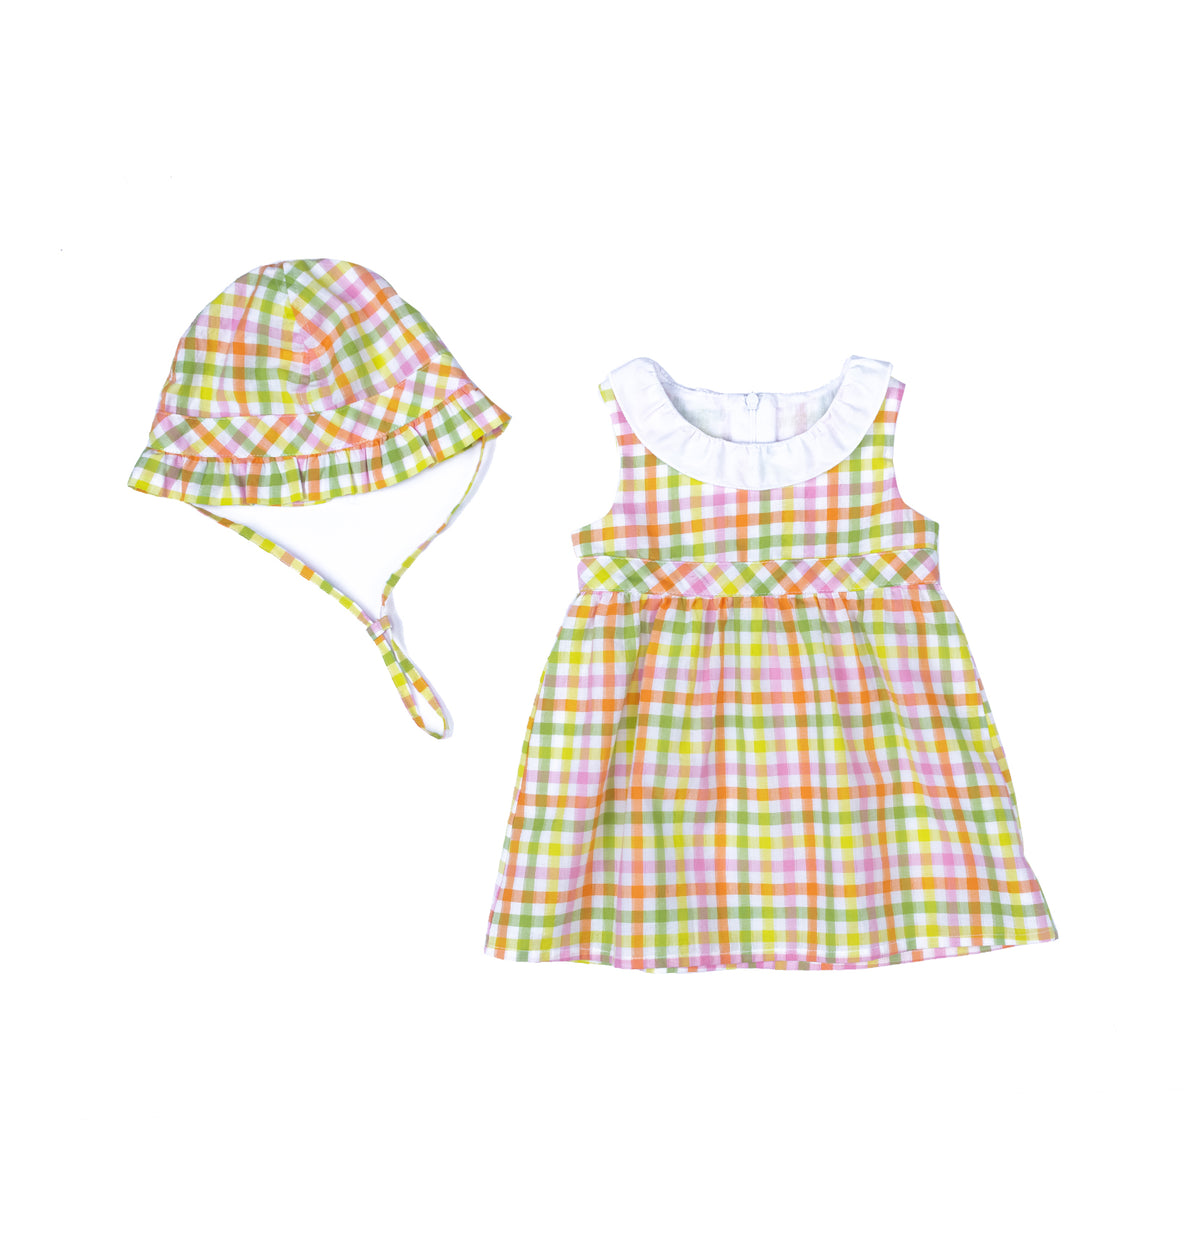 Stylish colorful baby girl dress by Pompelo